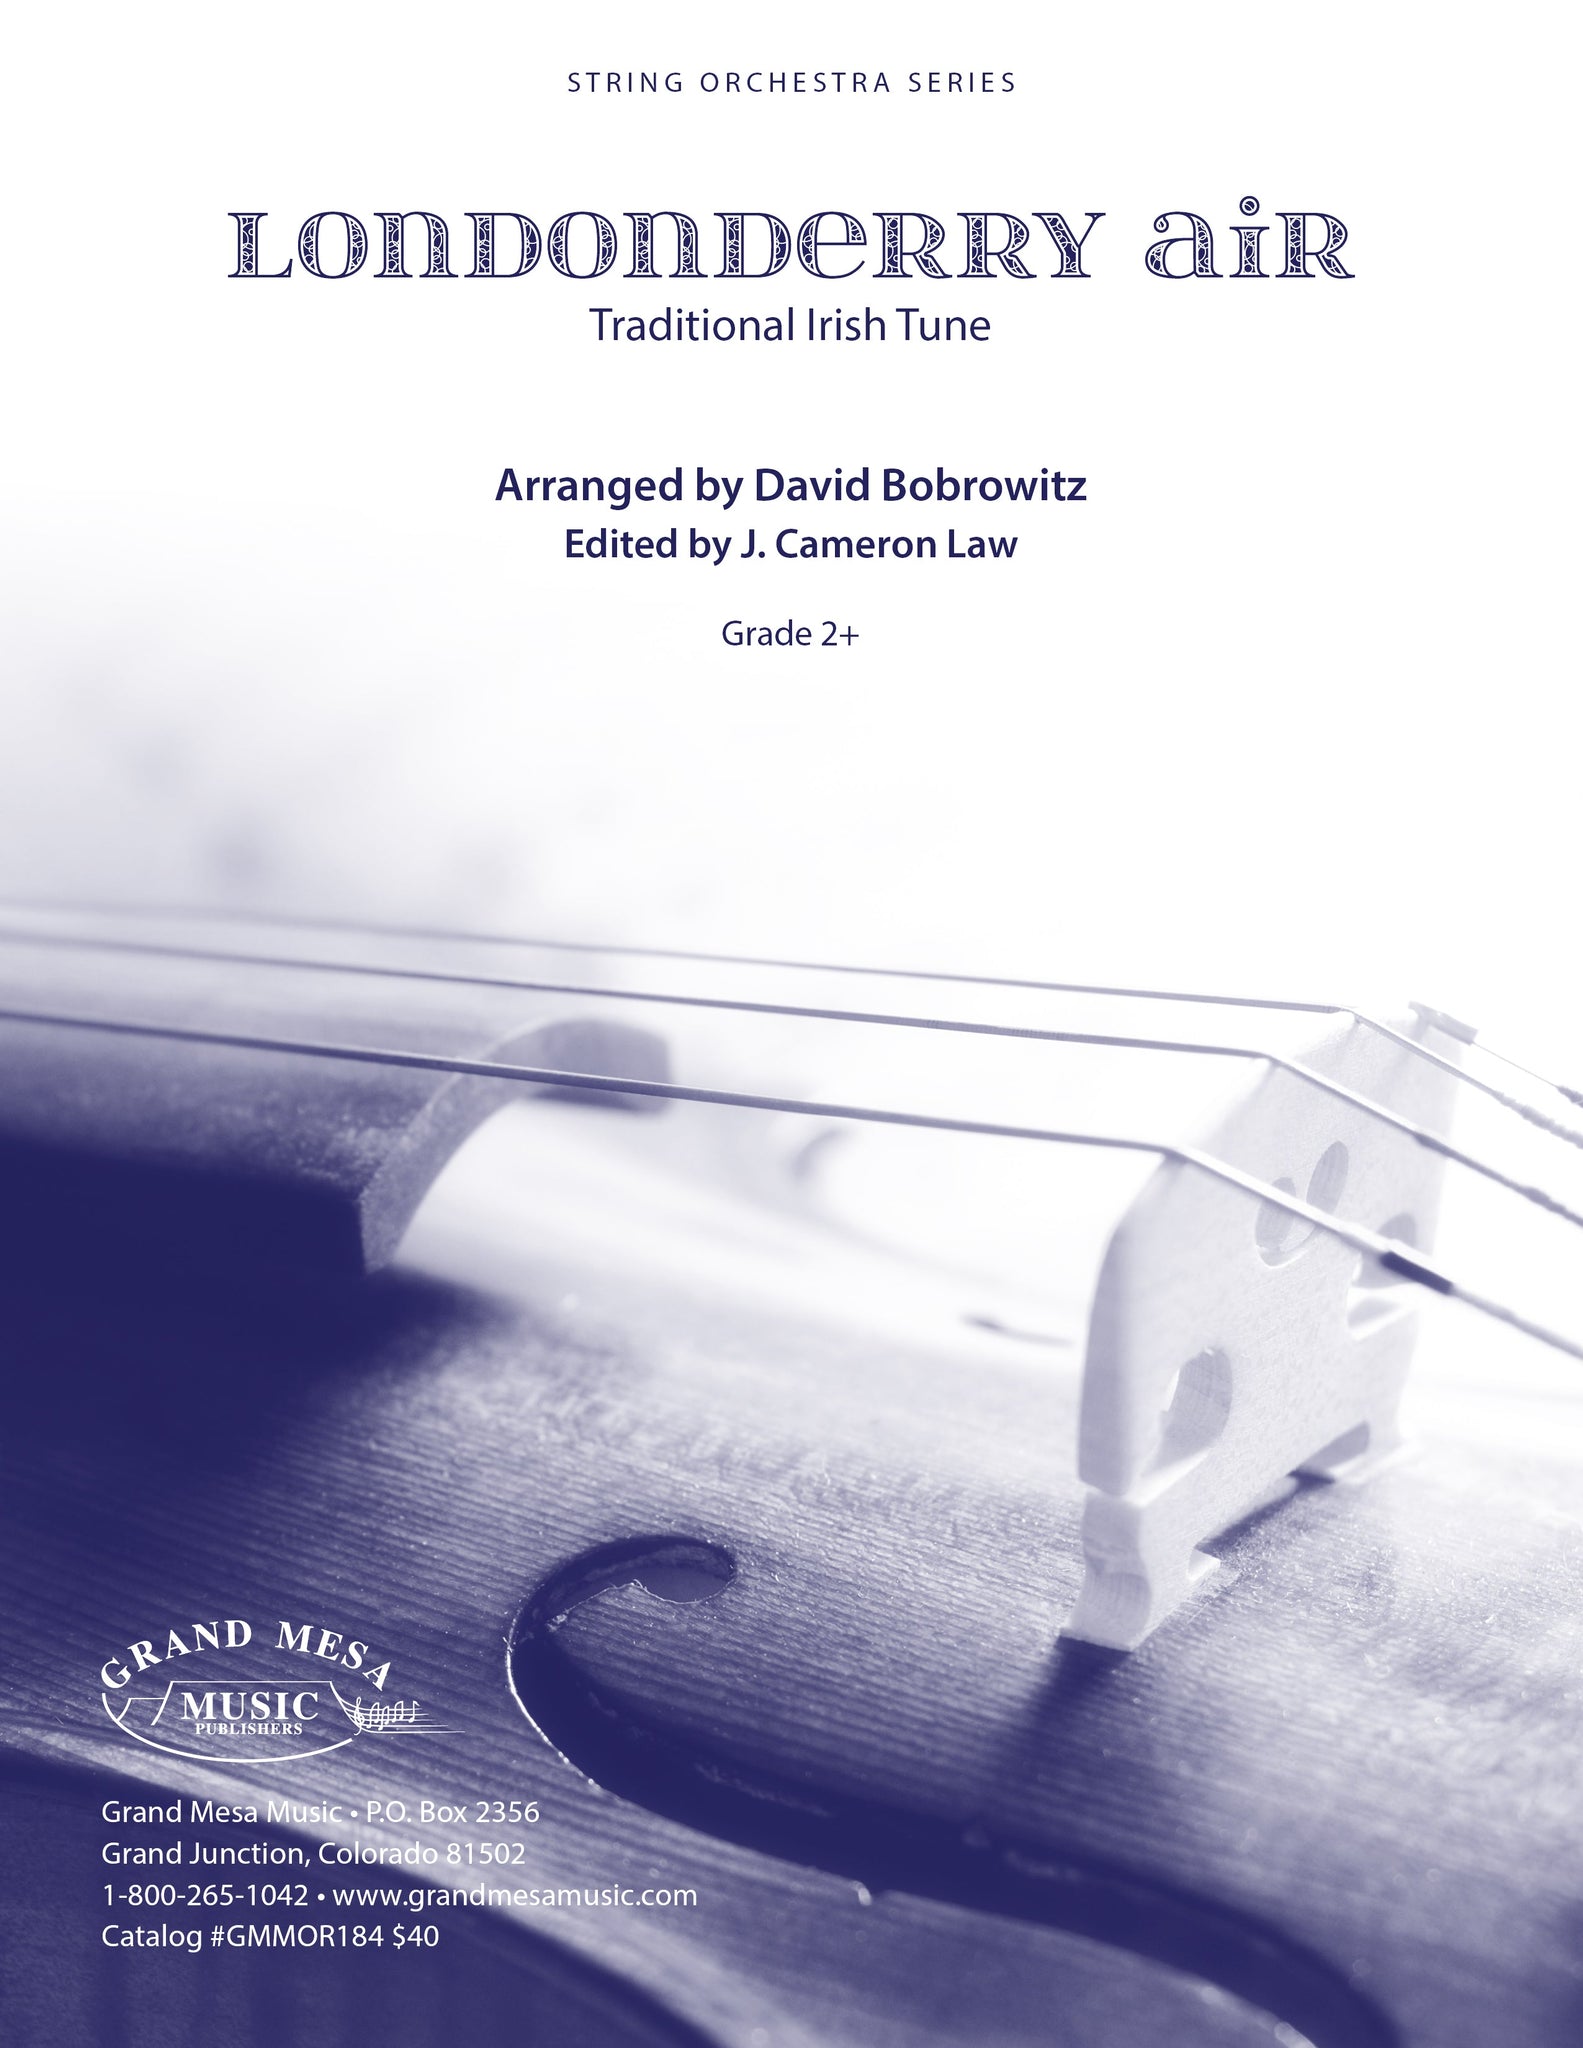 Strings sheet music cover of Londonderry Air, arranged by David Bobrowitz.